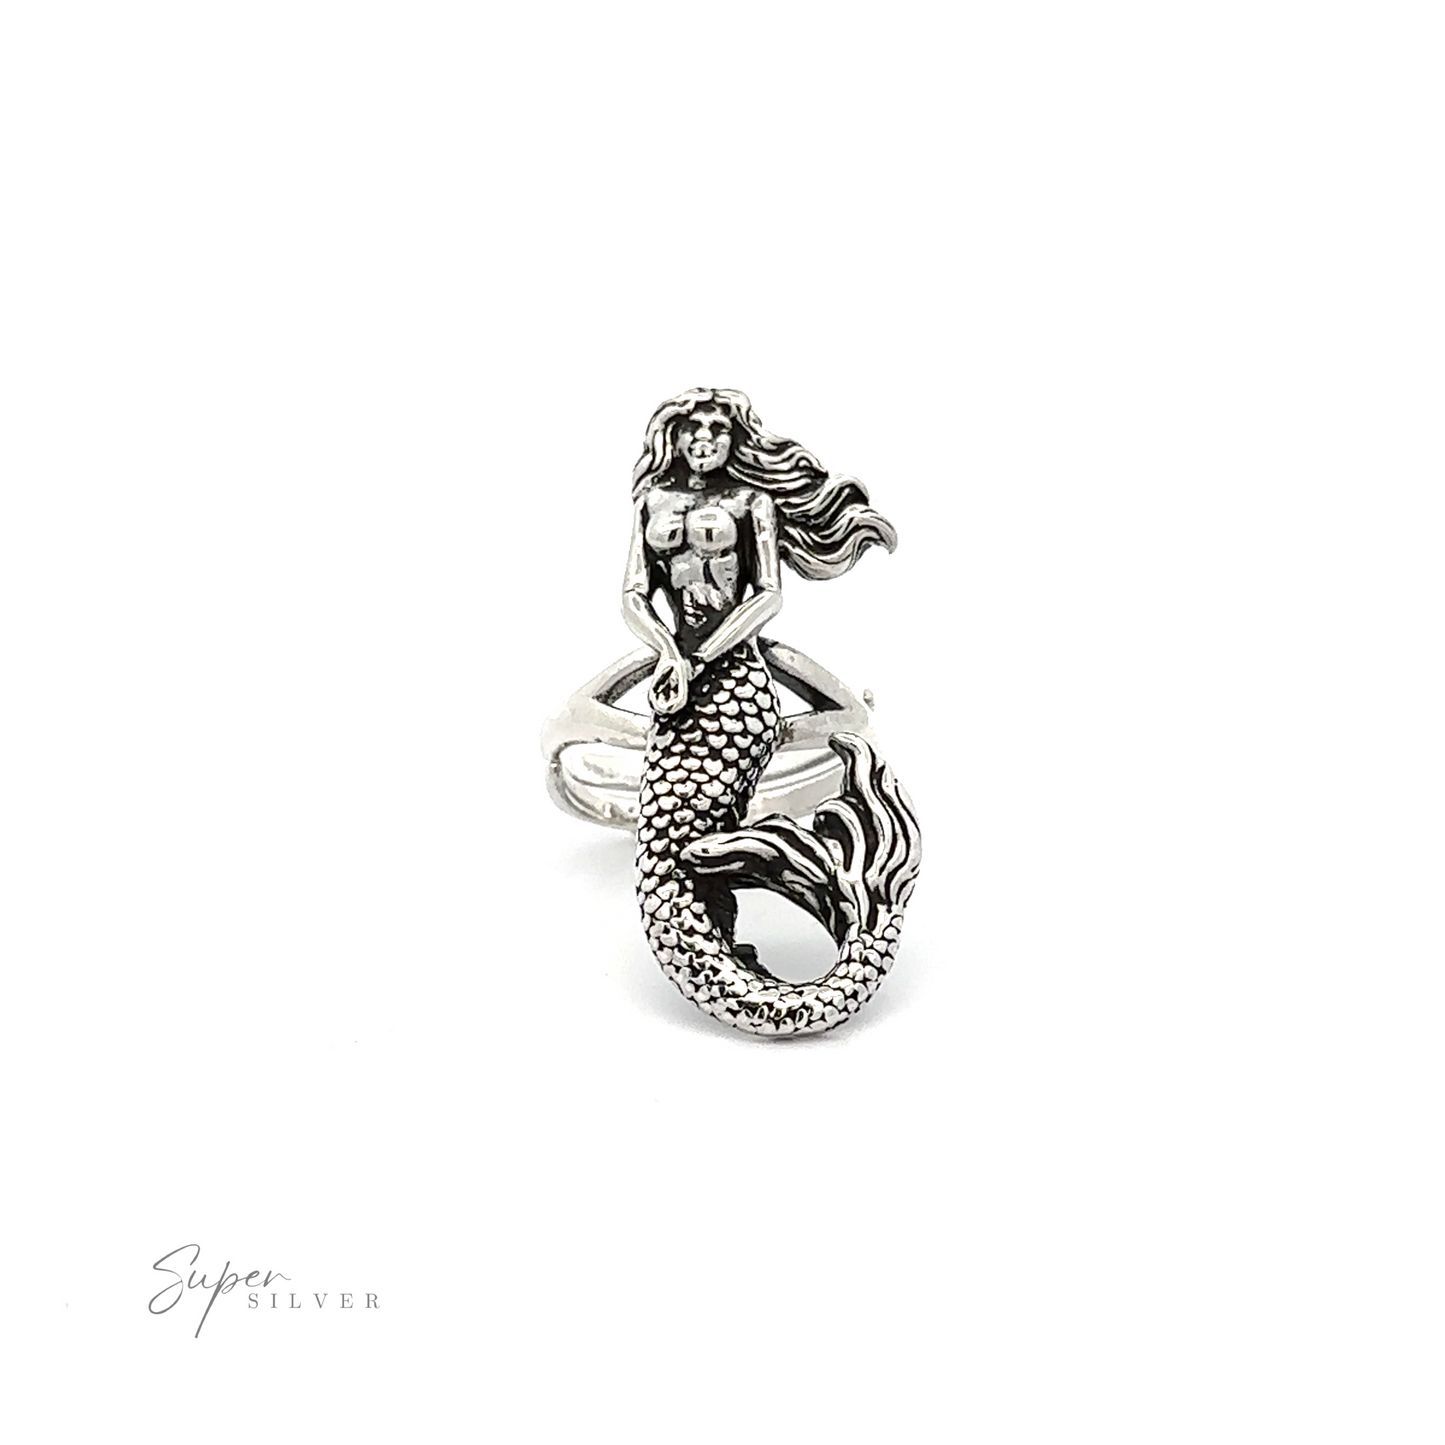 Statement Adjustable Mermaid Ring with detailed design placed on a white background showcasing the torso and tail of the mermaid as the main focus.